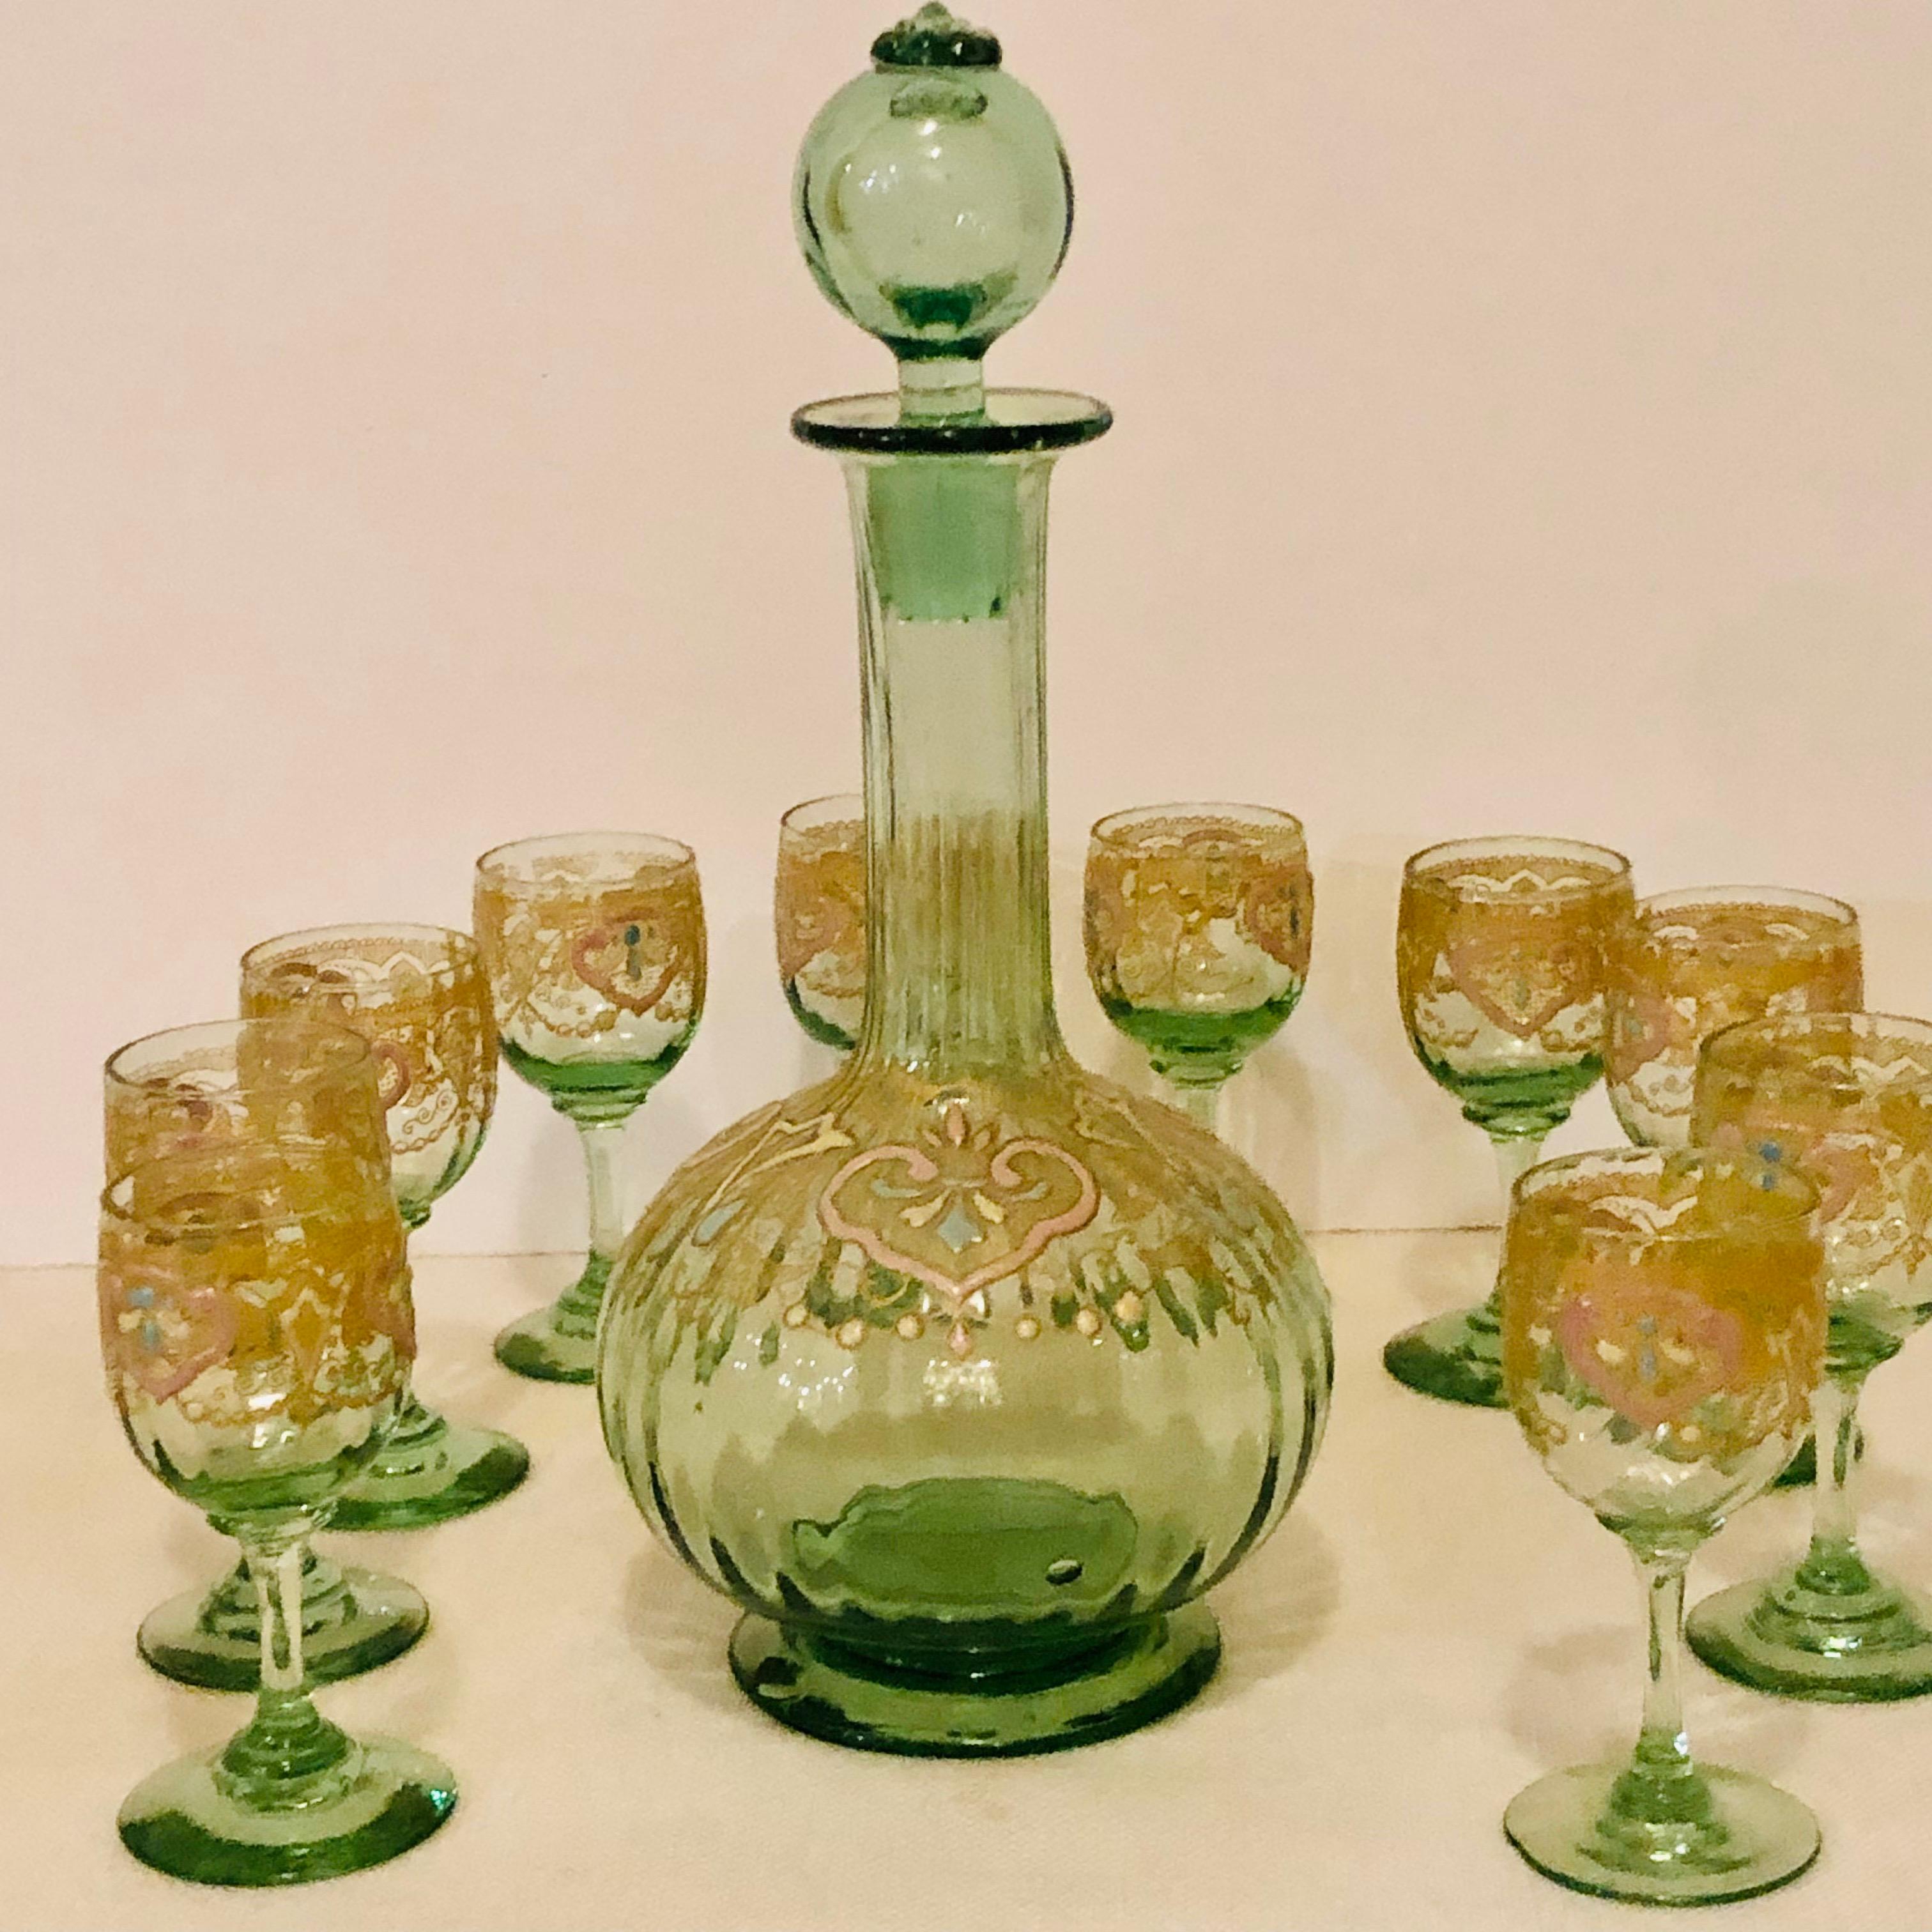 Venetian Decanter With Ten Venetian Cordial Glasses With Colorful Enamel Accents 3